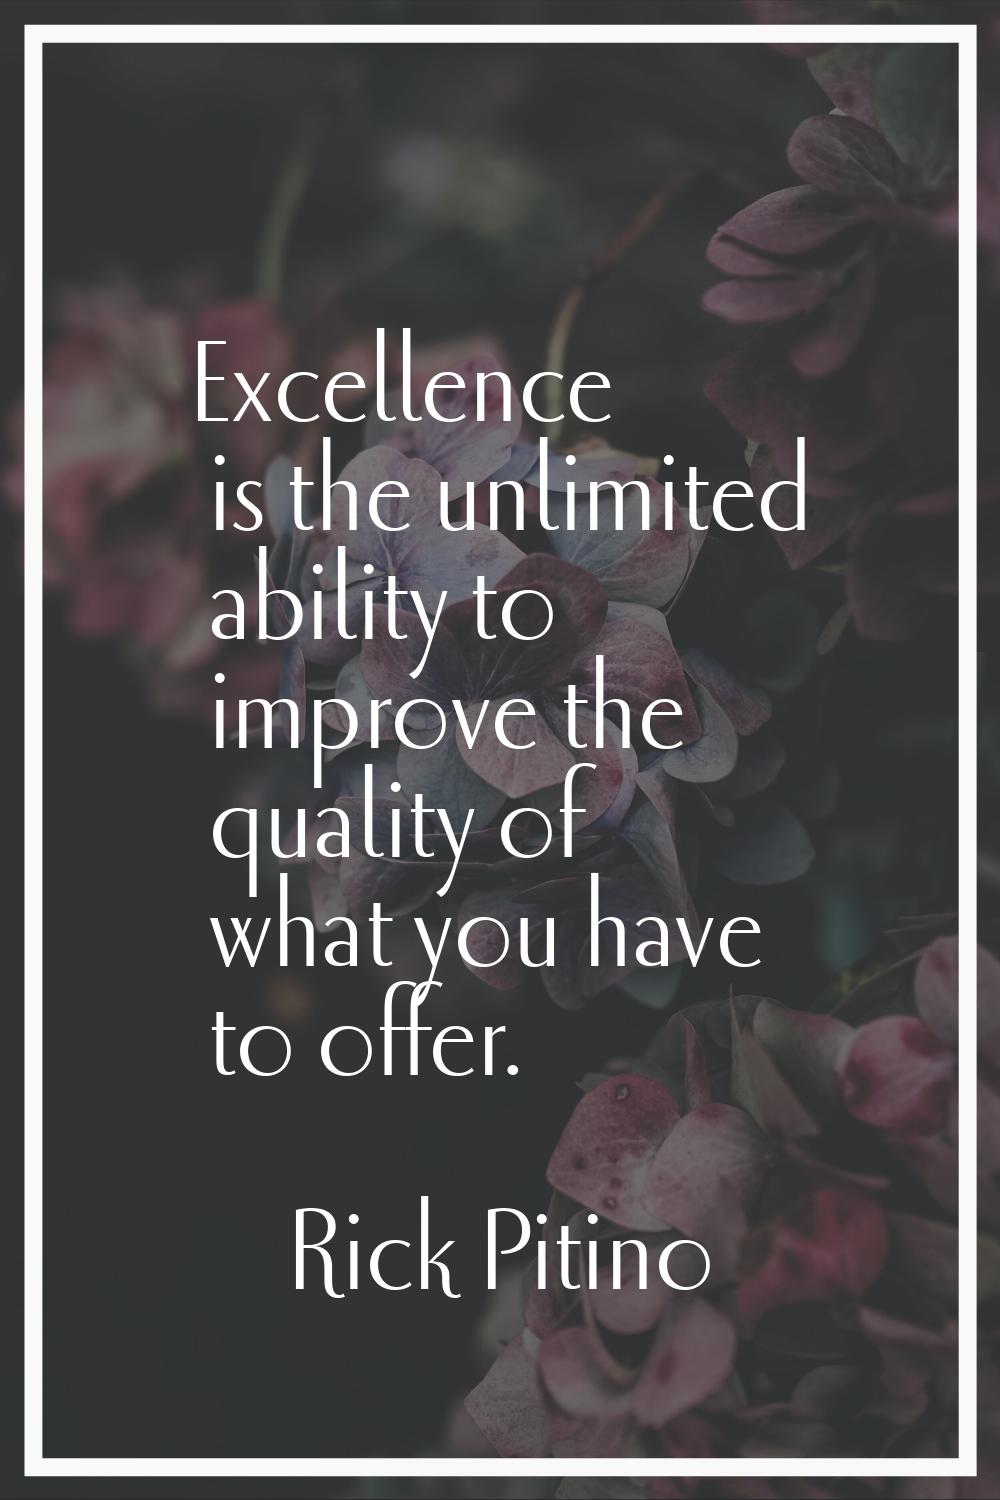 Excellence is the unlimited ability to improve the quality of what you have to offer.